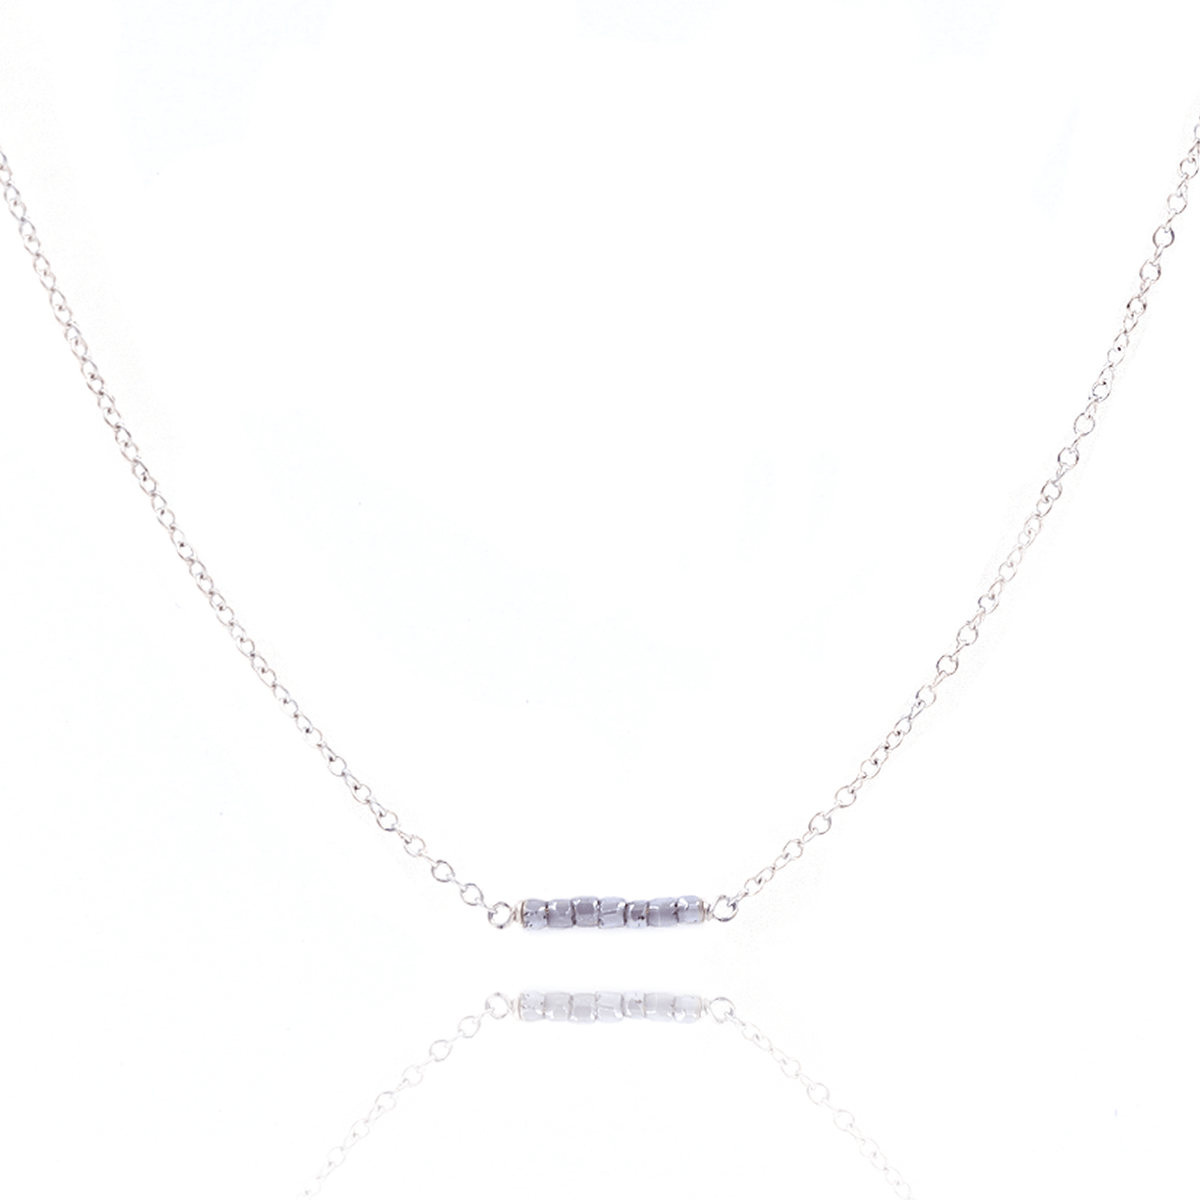 Flow Necklace Dainty Necklace Sterling Silver / 14" - 16" MaeMae Jewelry | "Flow" Necklace | Blue Gray beads